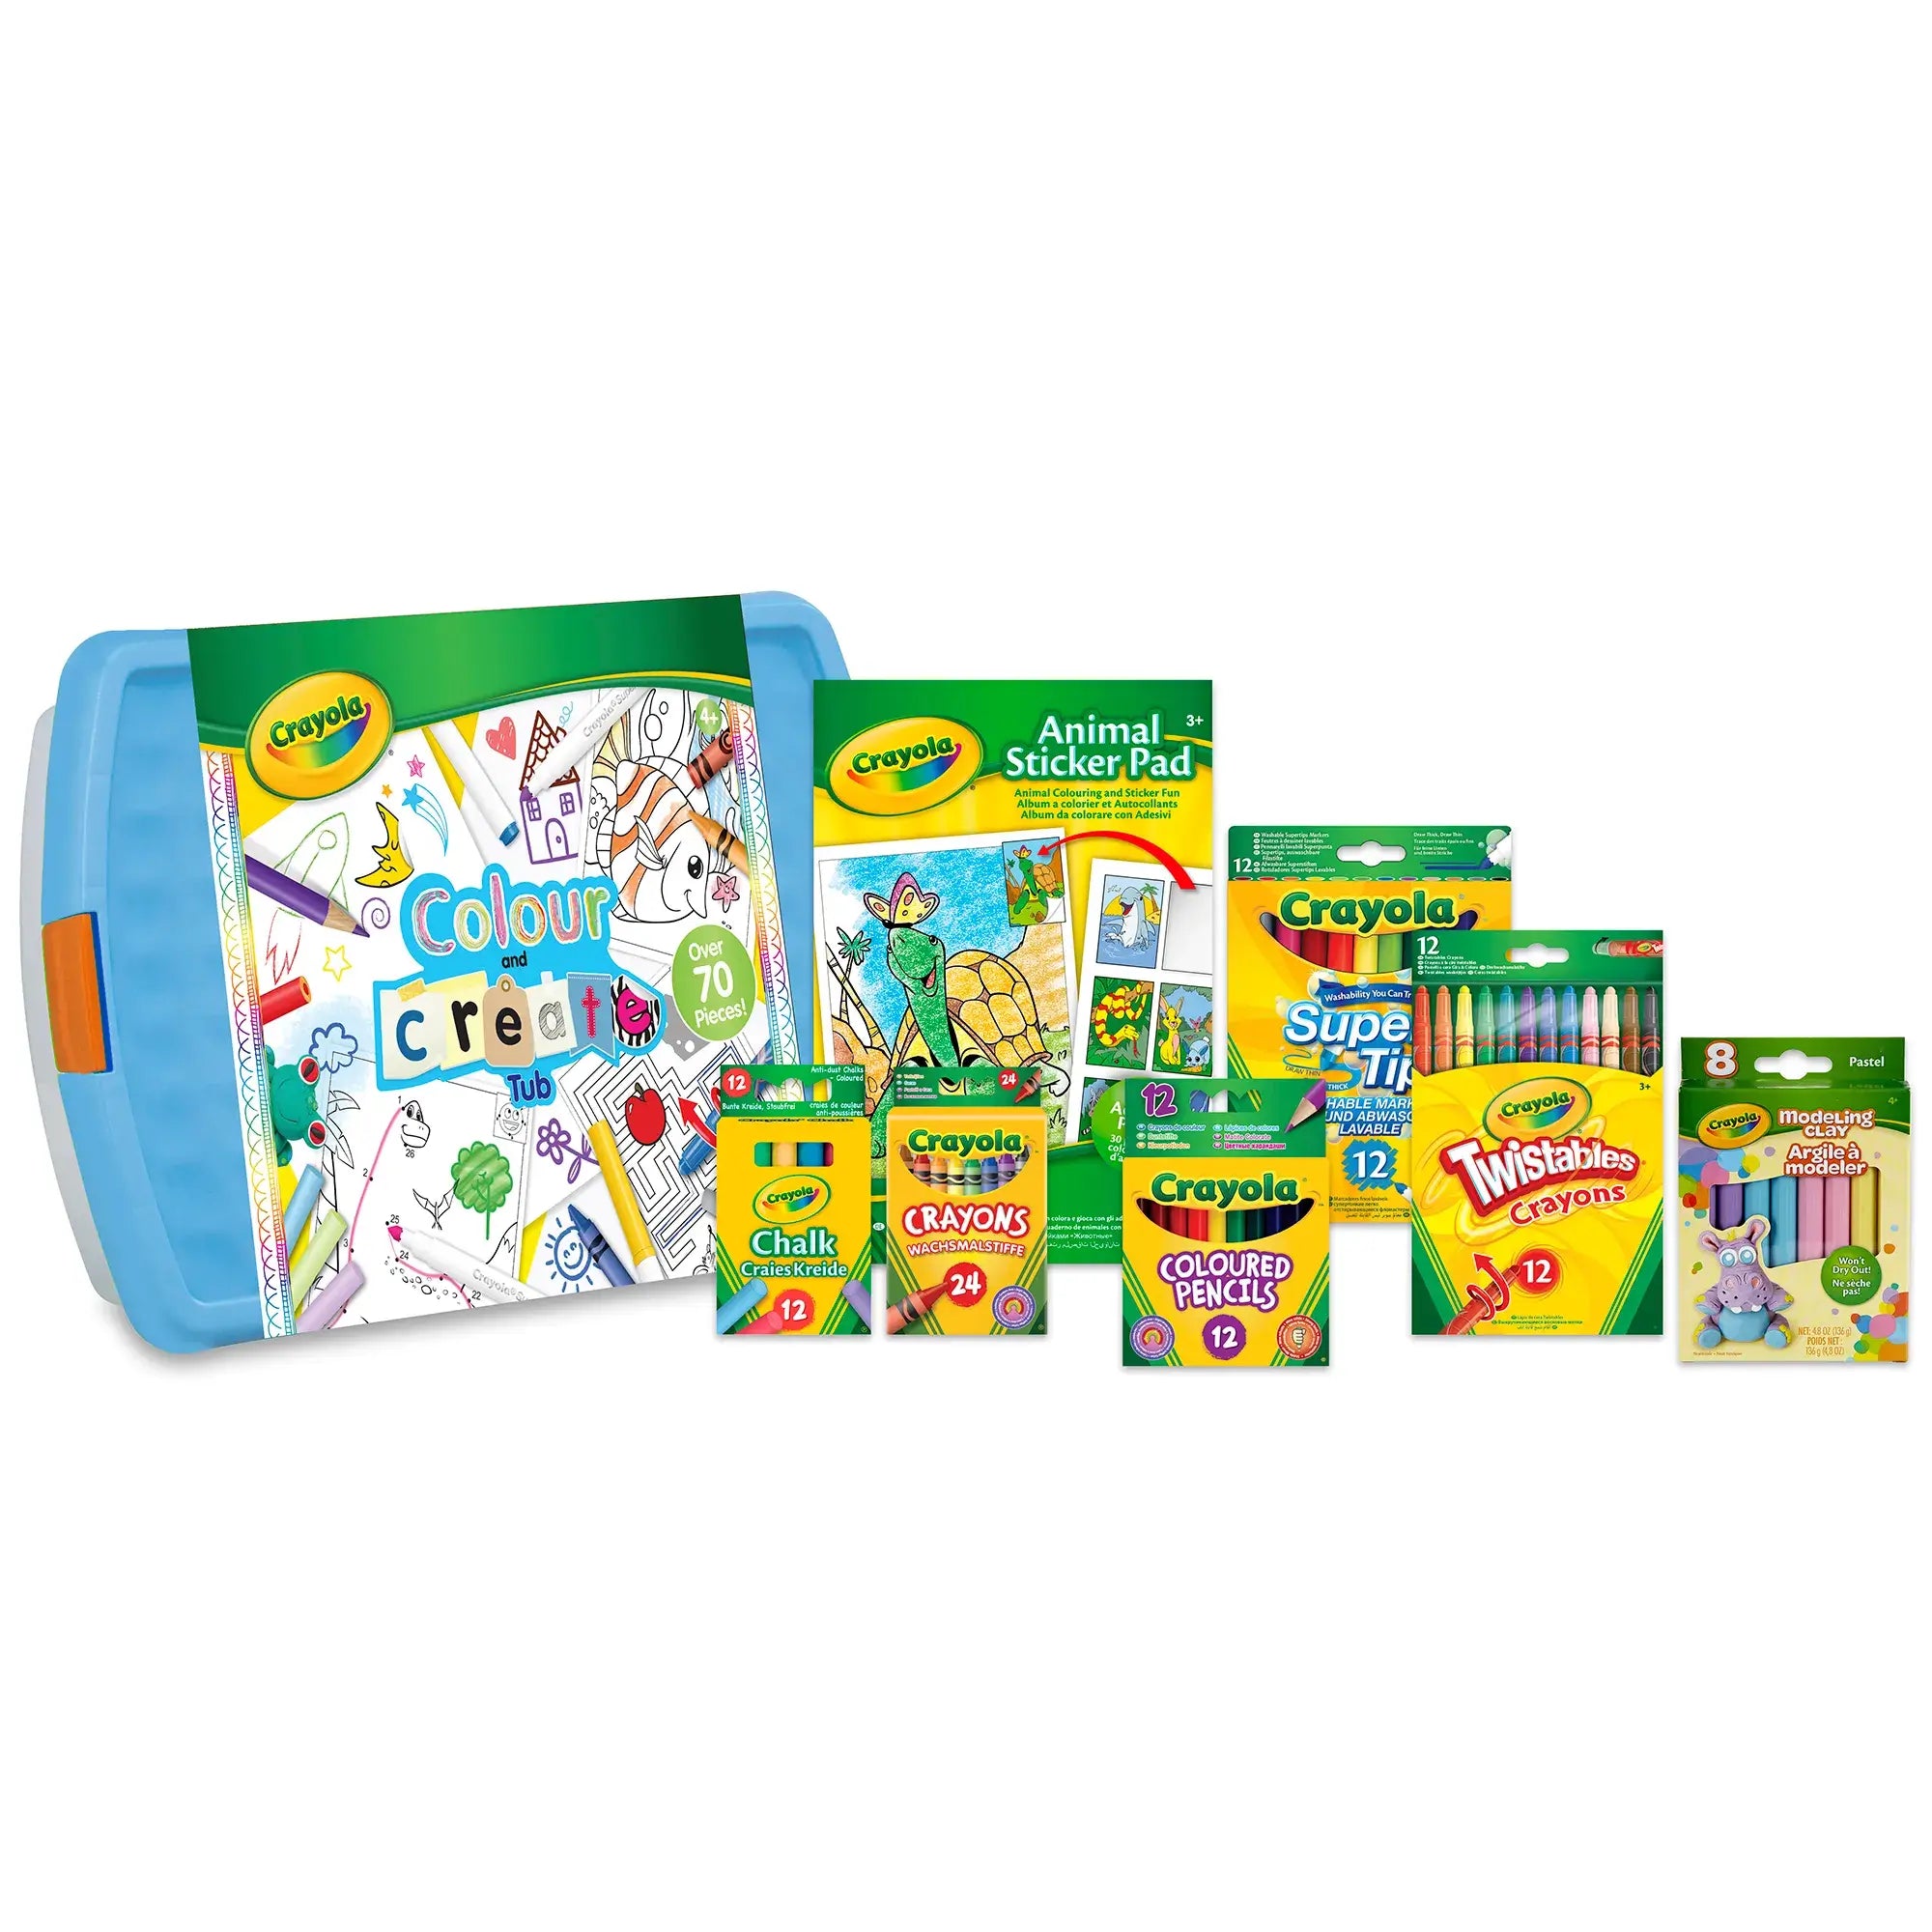 Activity kit for kids - Crayola Color & Create Tub